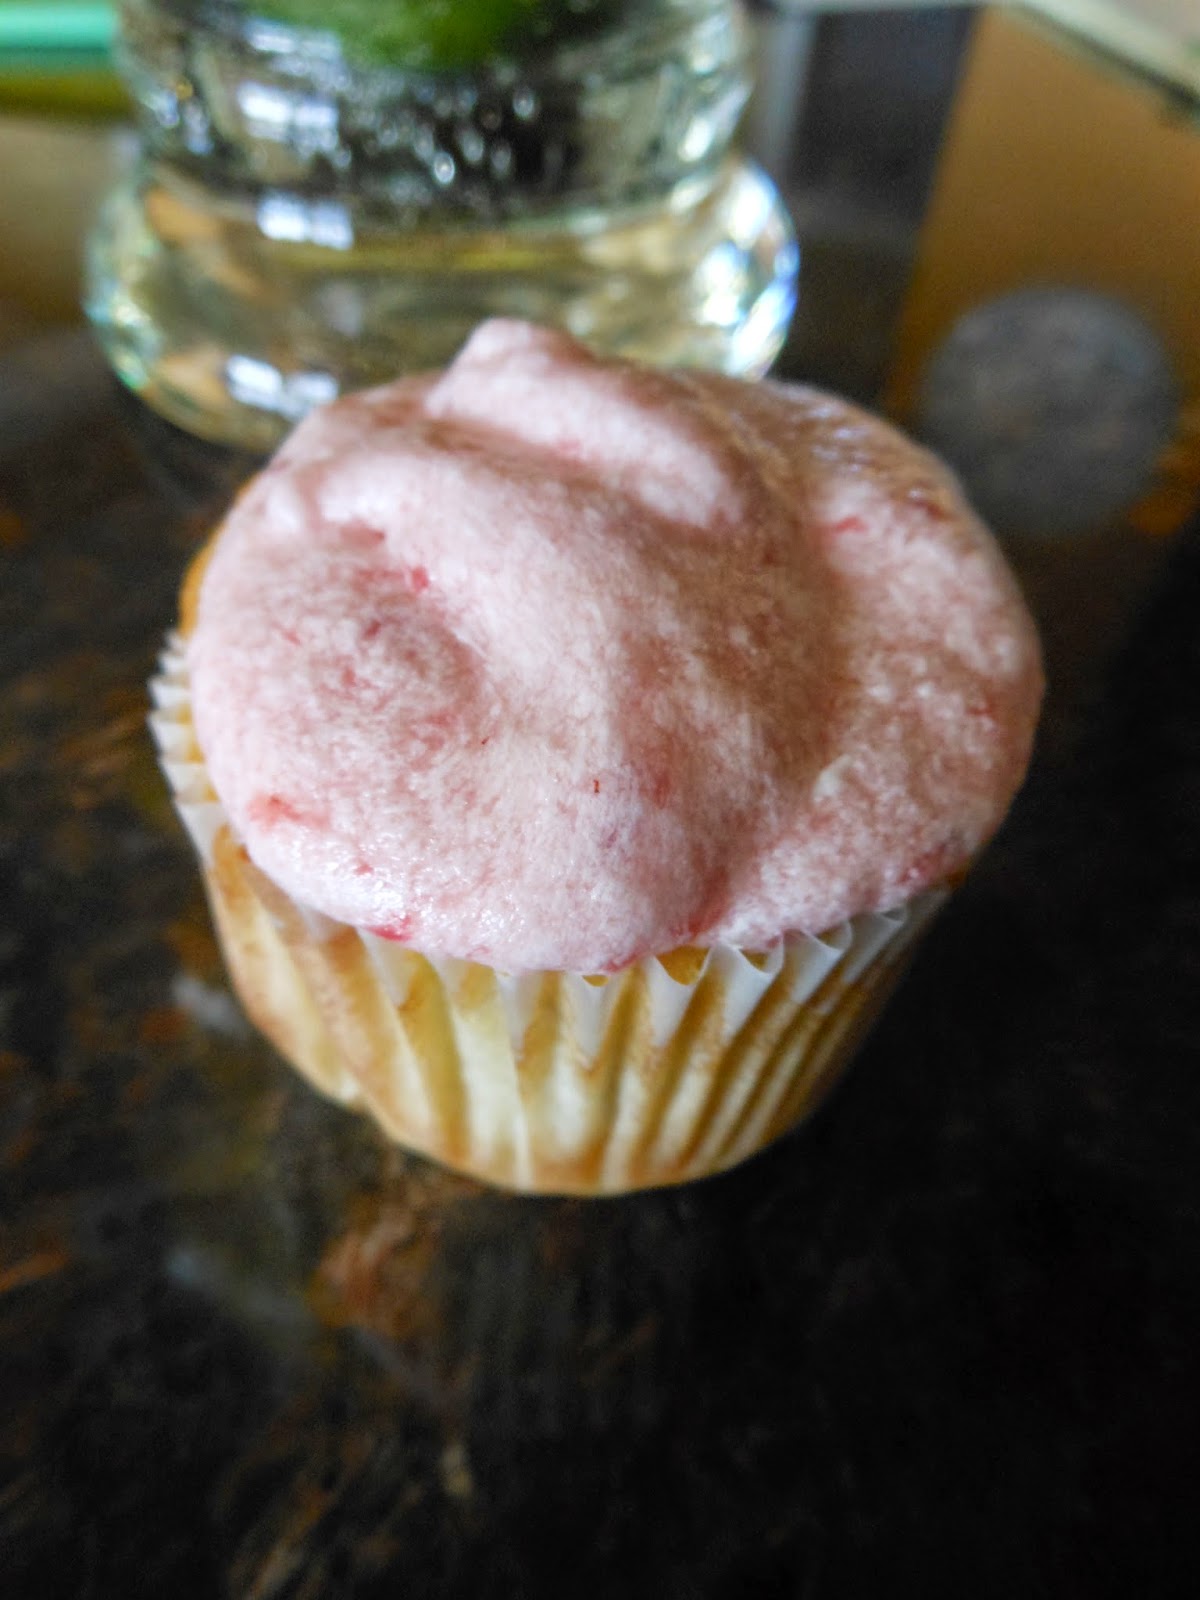 dress in sparkles: strawberry banana cupcakes